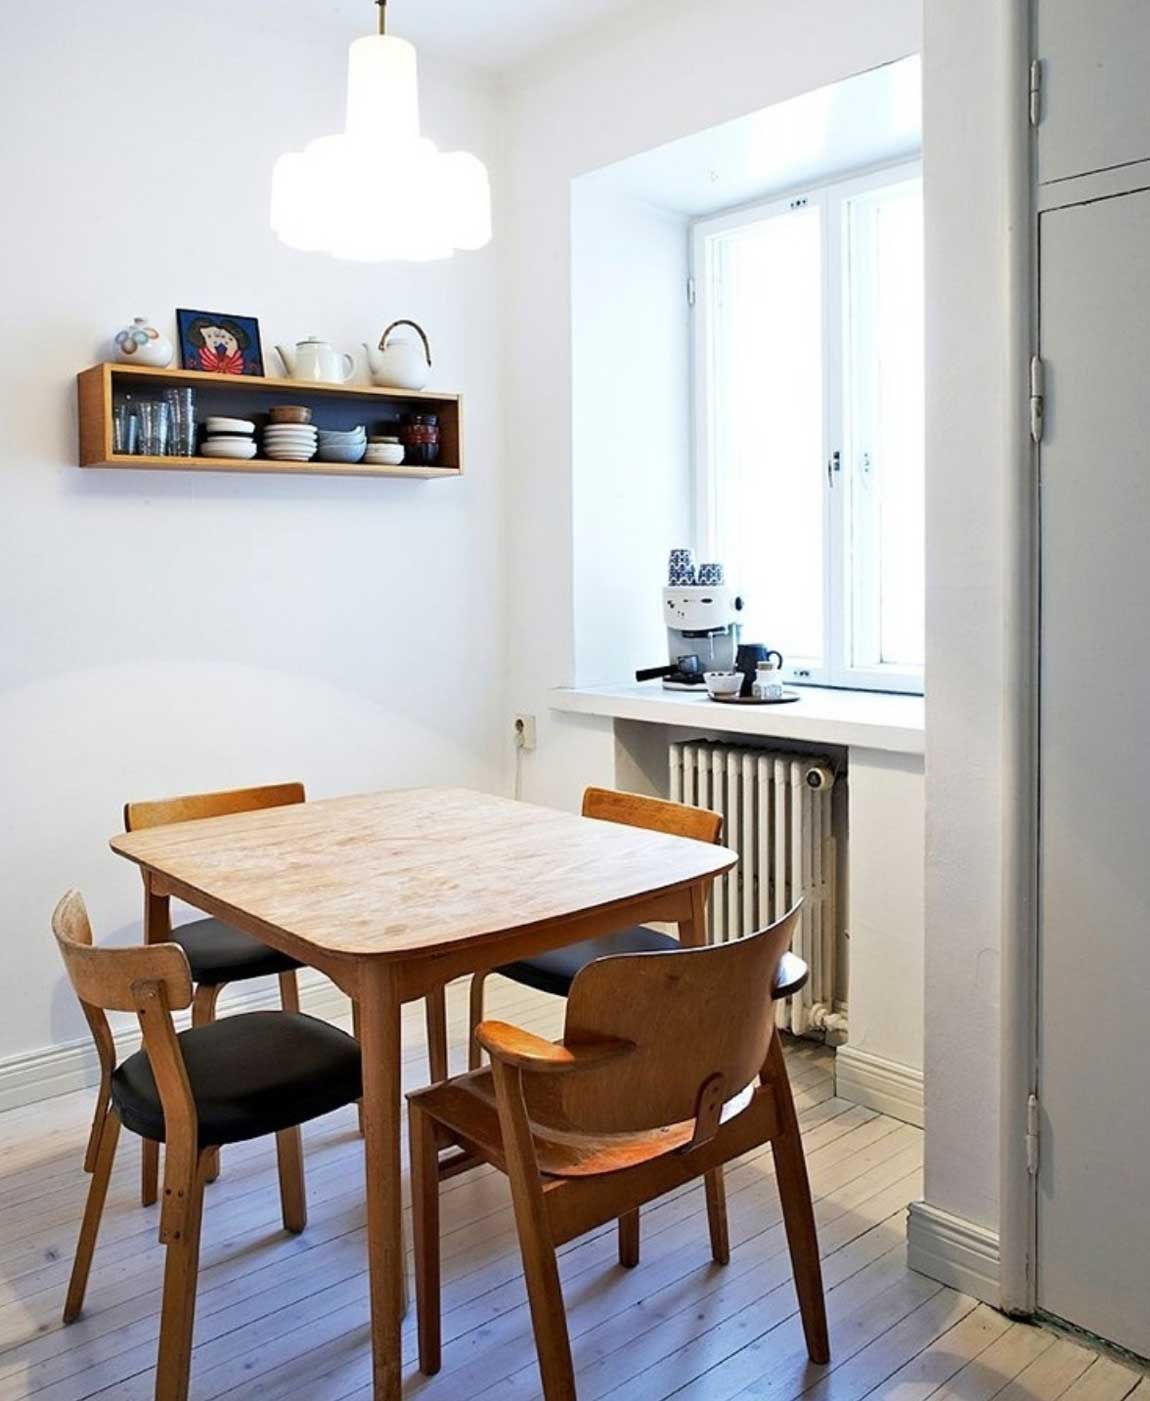 Scandinavian Dining For Fascinating Scandinavian Dining Room Ideas For Small Home Designs With Rustic Wooden Dining Table Idea And Modern White Granite Countertop Colors Design Dining Room The Best Simple Dining Room Ideas